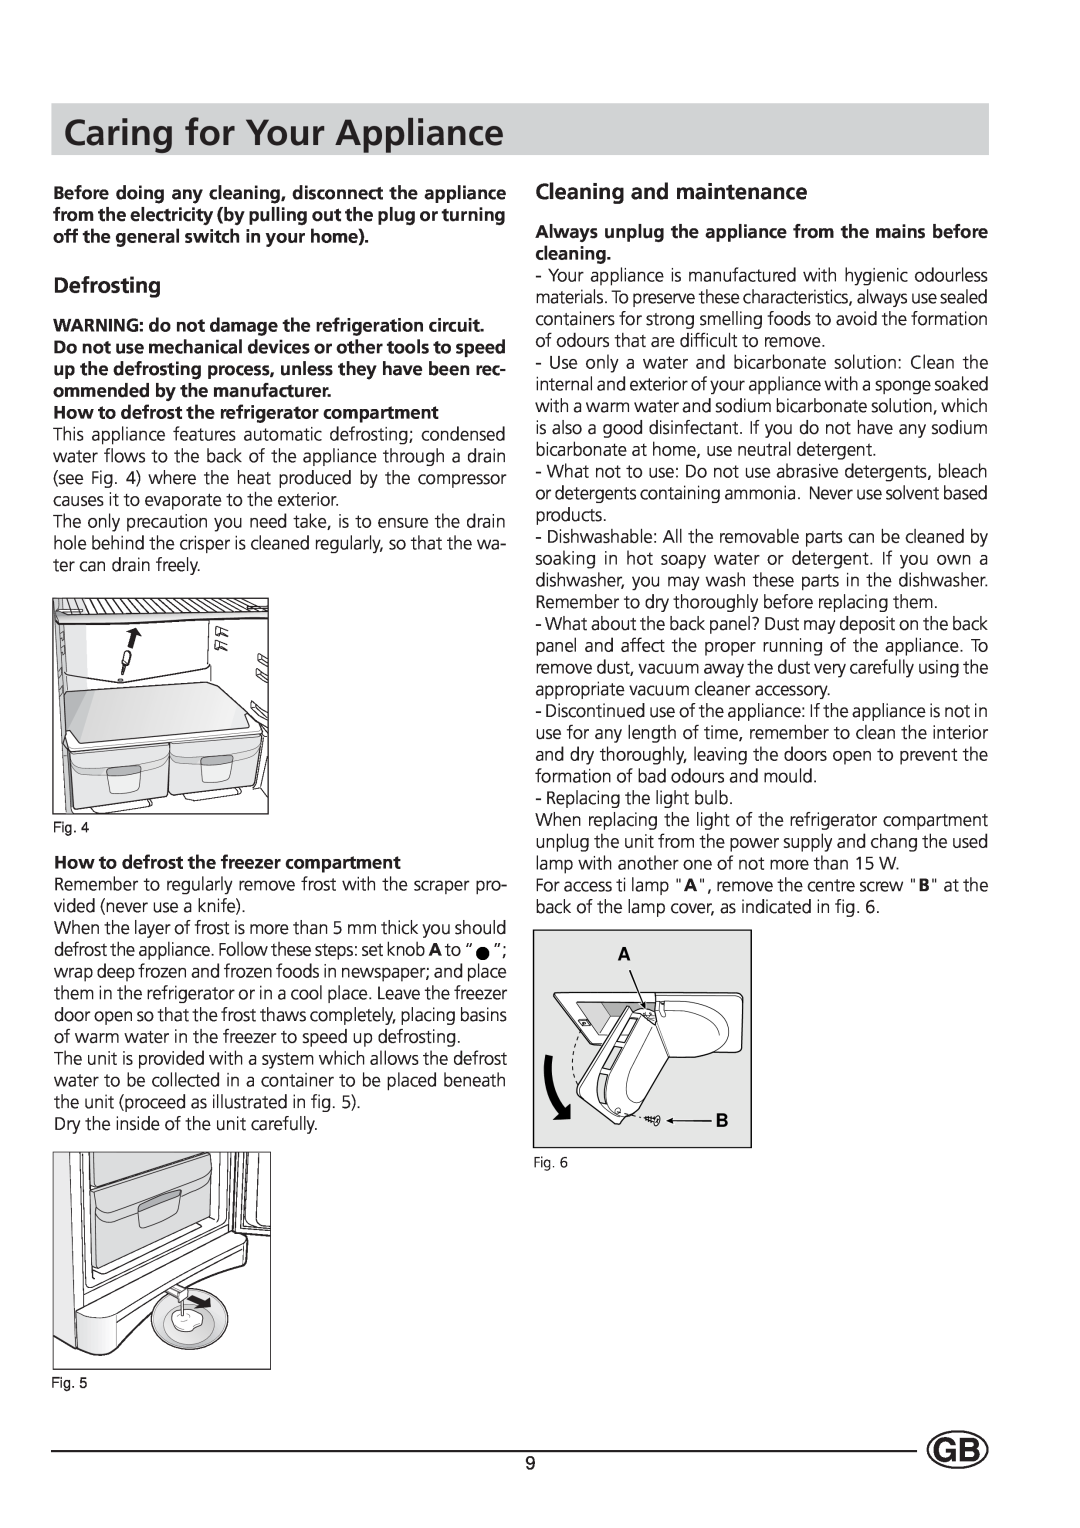 Indesit BA 139 PS Caring for Your Appliance, Defrosting, Cleaning and maintenance, How to defrost the freezer compartment 